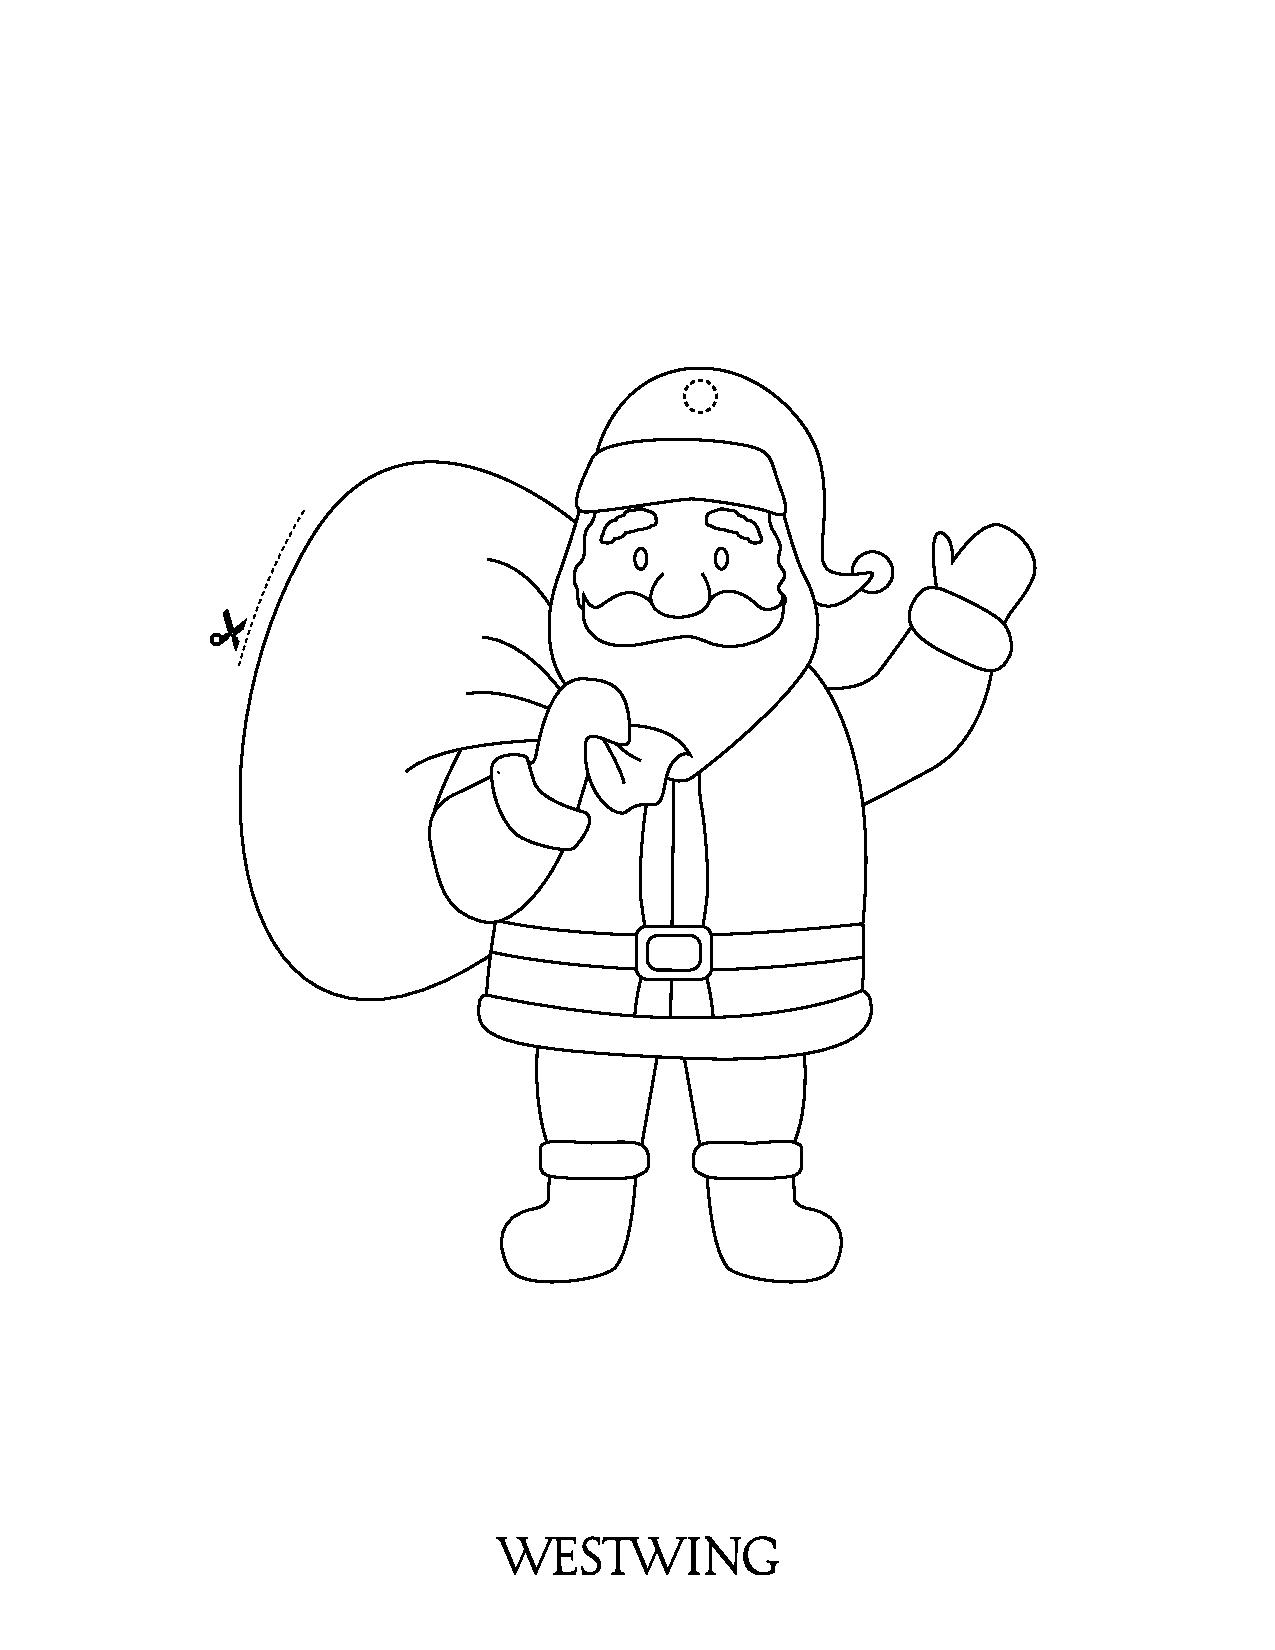 A nice Santa Claus to cut out and color, very simple, for children